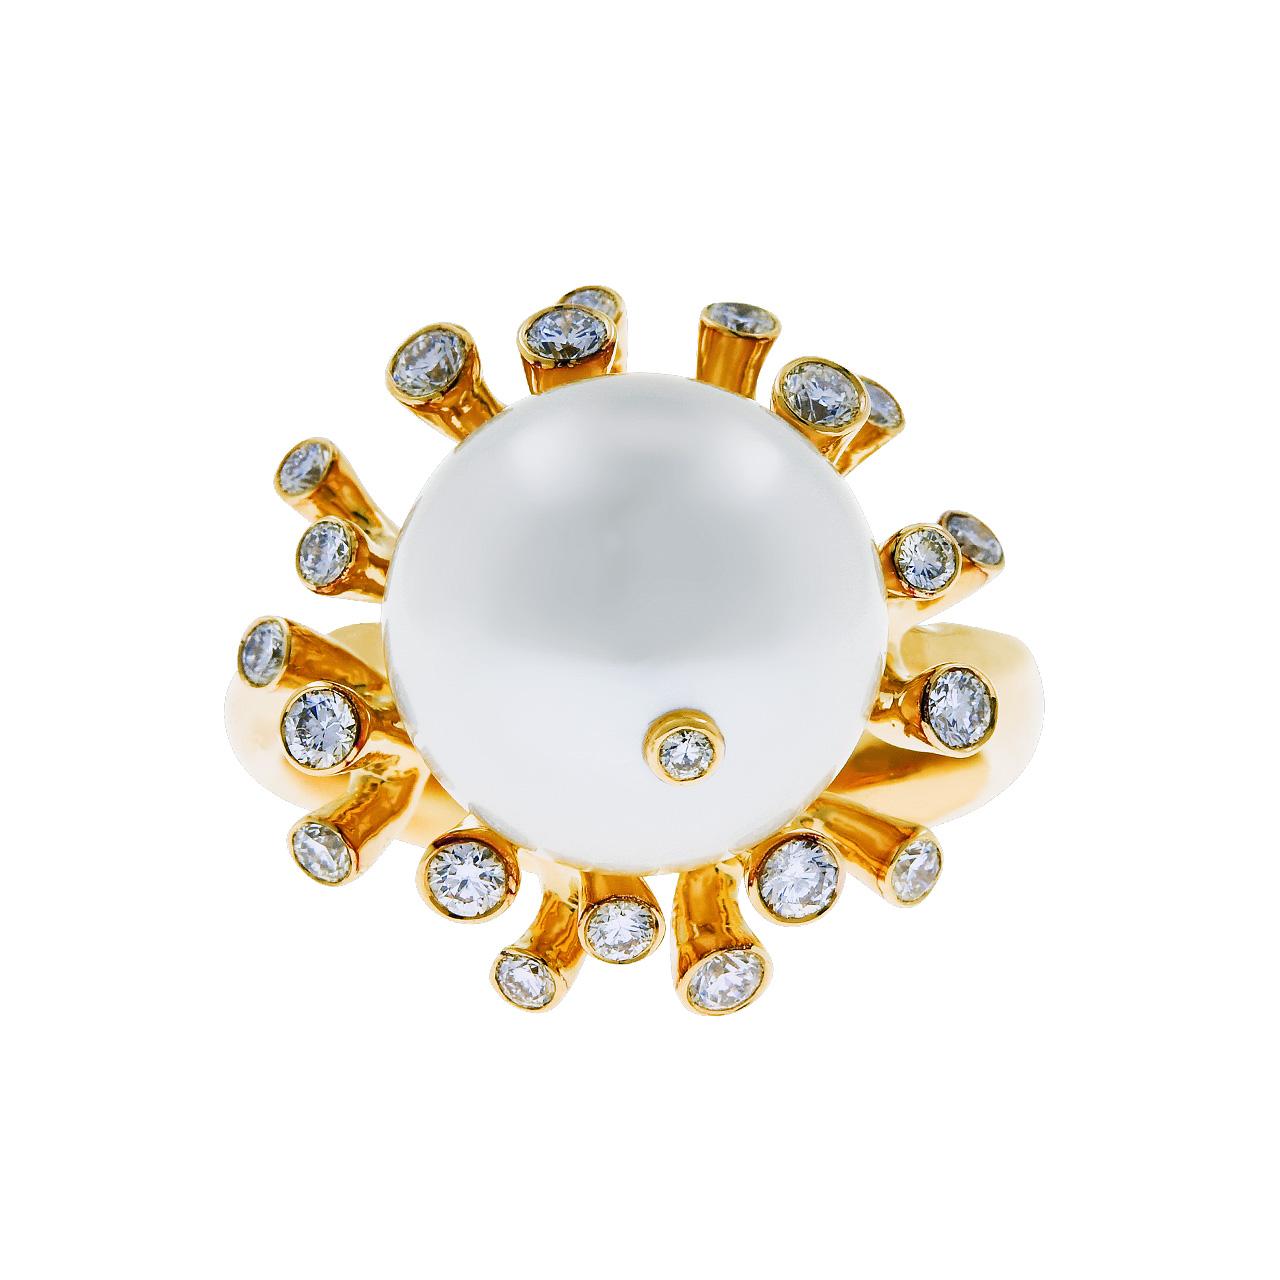 - 22 Round Diamonds - 0.43 ct, E-F/VS
- 11.2 mm White South Sea pearl
- 18K Yellow Gold 
- Weight: 10.54 g
- Size: 16.5 mm
This elegant ring from the Coral collection of Jewelry Theater features a lustrous white pearl, surrounded with the gold